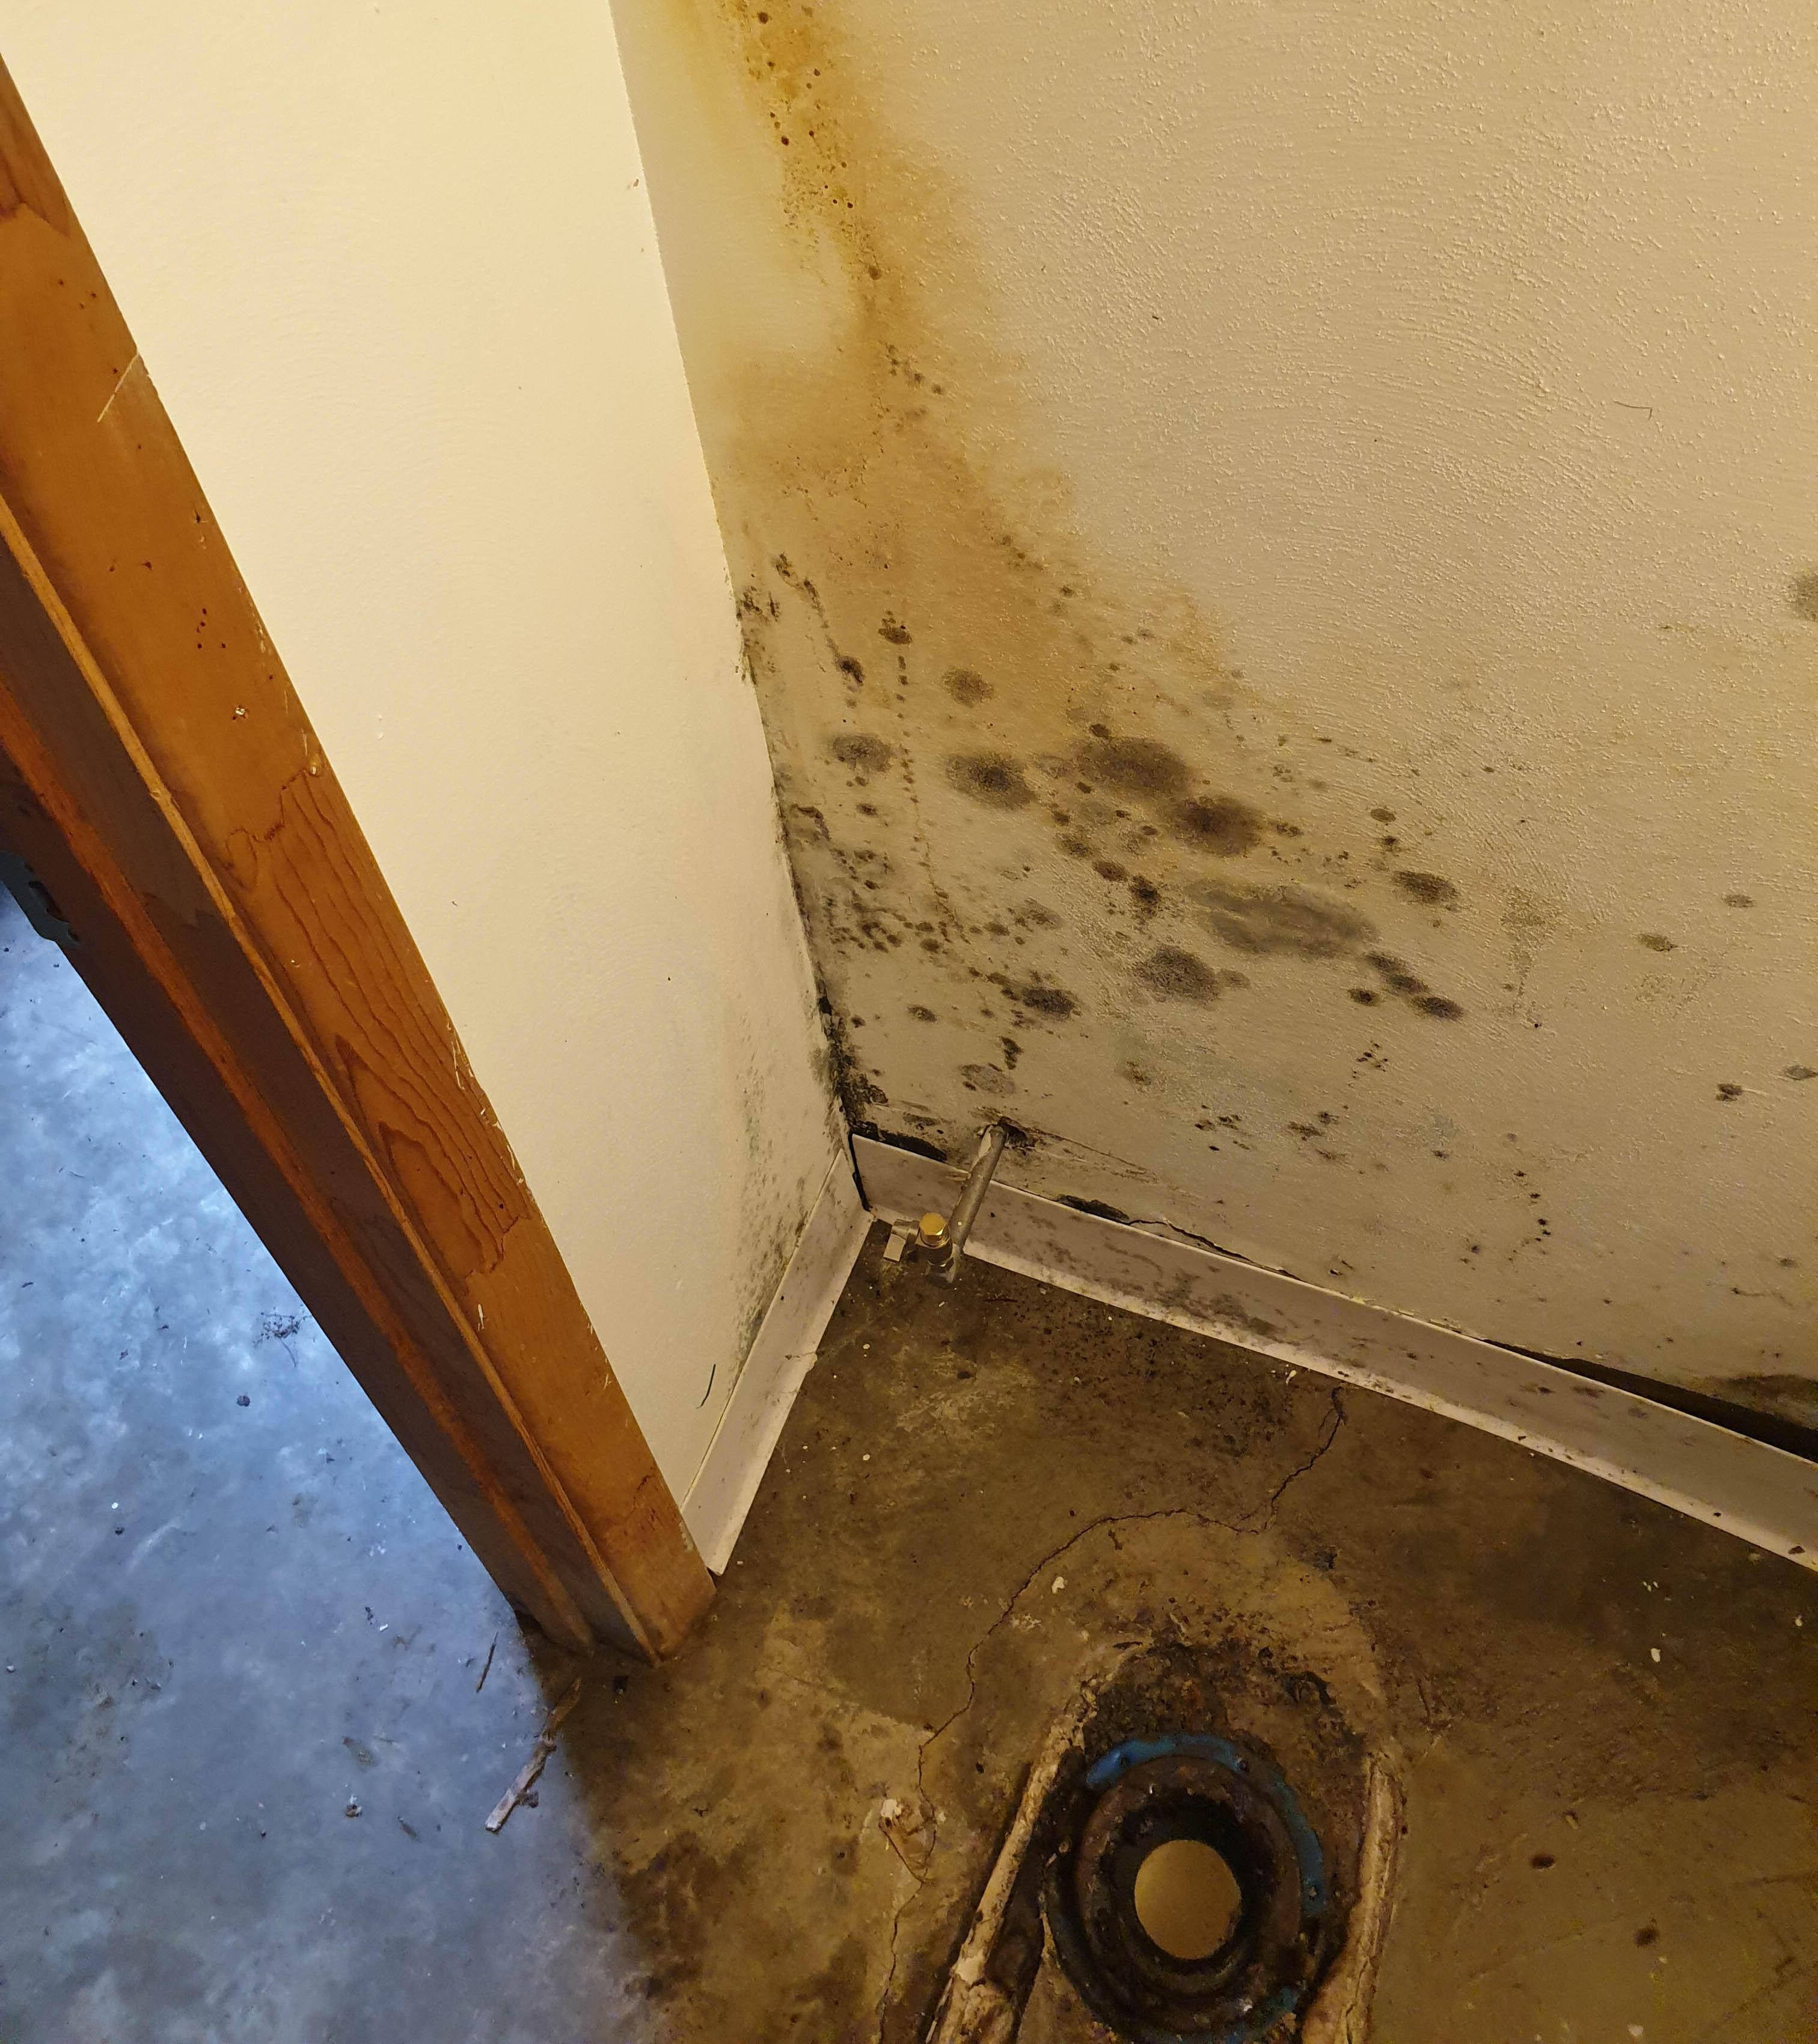 SERVPRO of St. Louis County NW offers quick cleanup and remediation services to keep the mold damage to a minimum and spread to non-affected areas. If you have any questions or would like to schedule service, please give us a call.